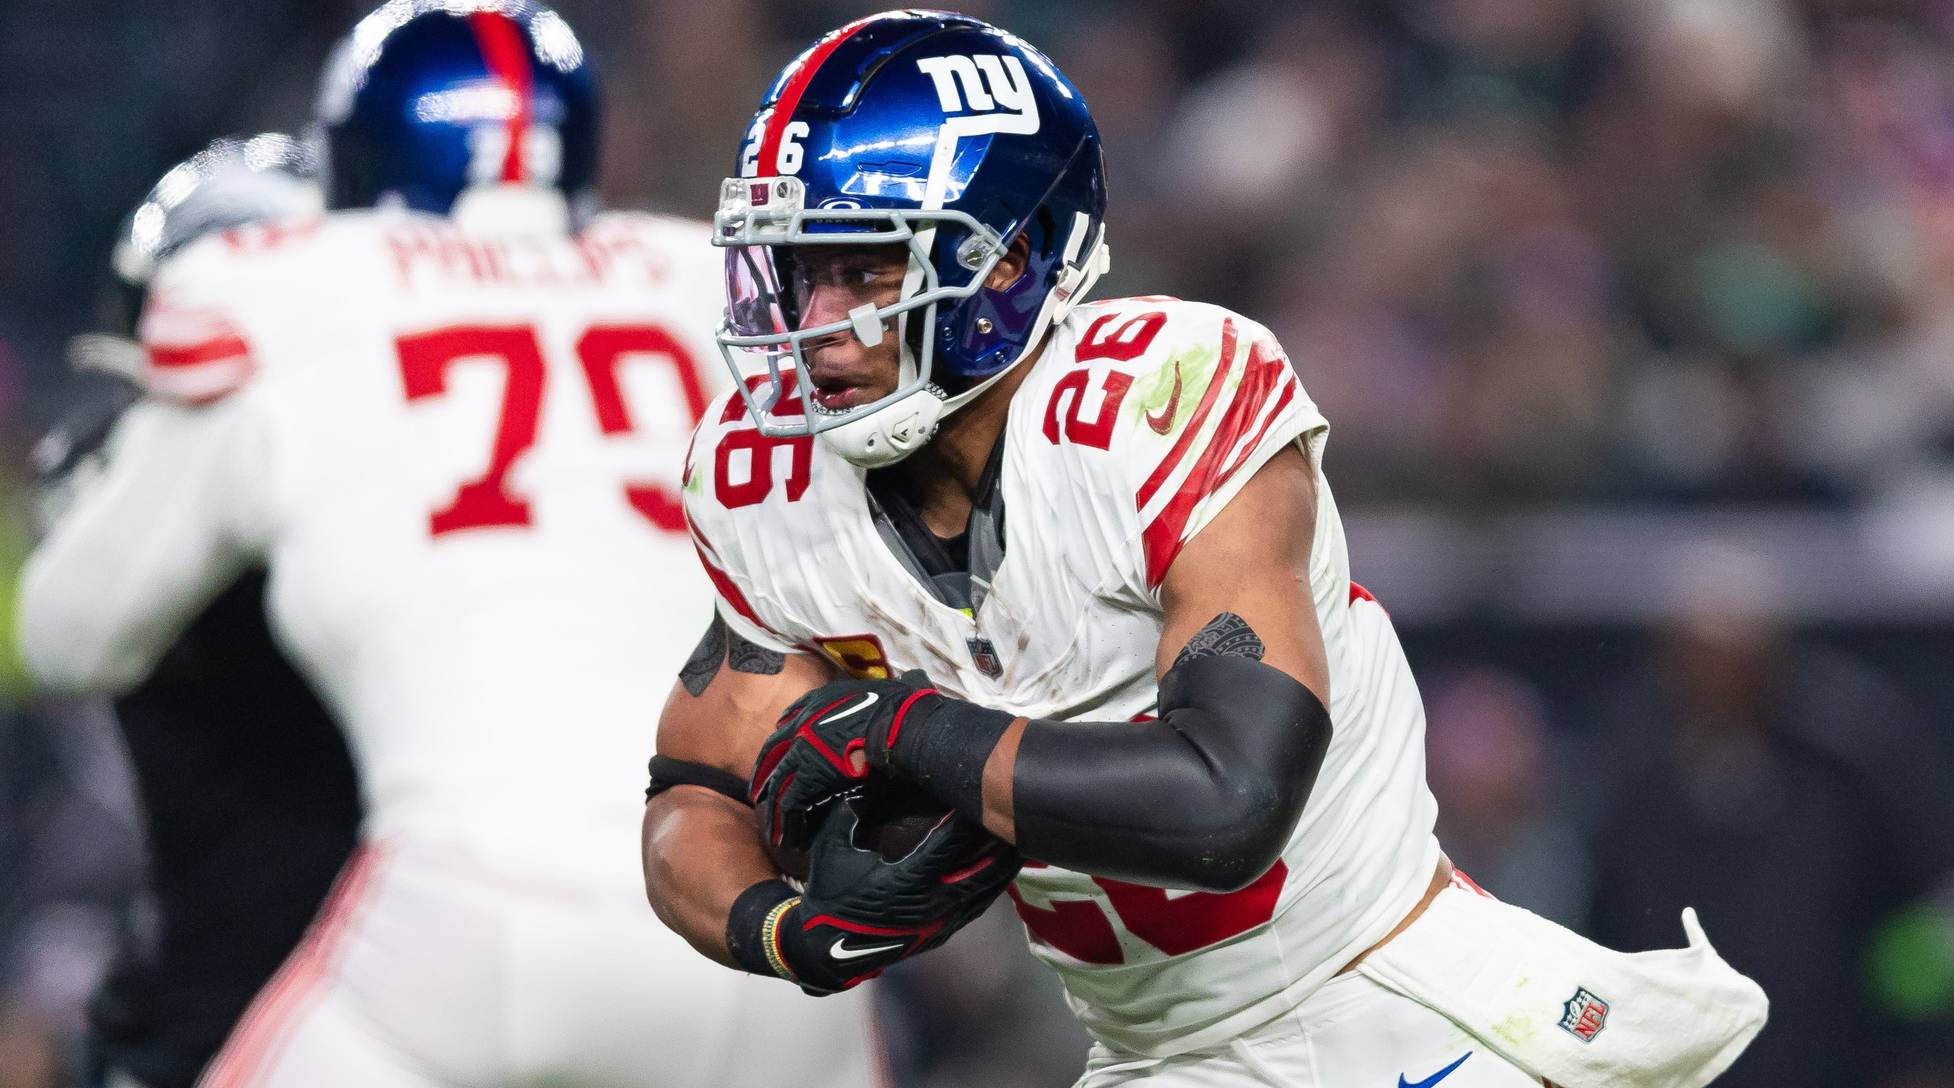 Giants running back Saquon Barkley runs the ball in a game vs. the Eagles.